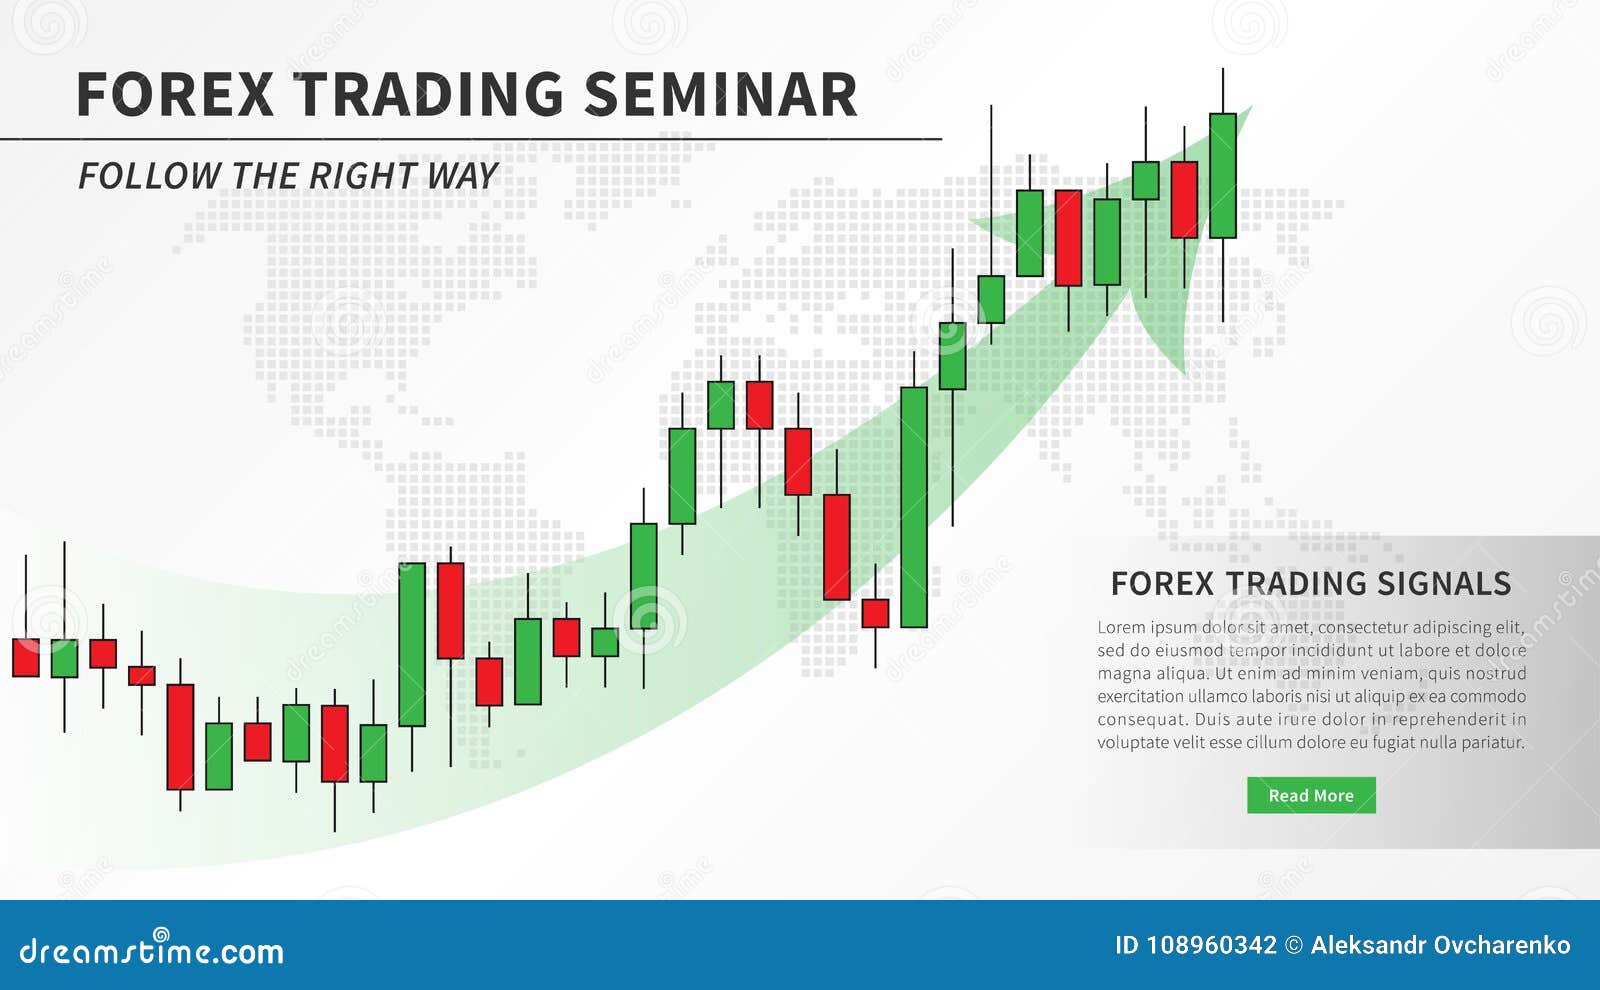 How To Read Forex Trading Charts